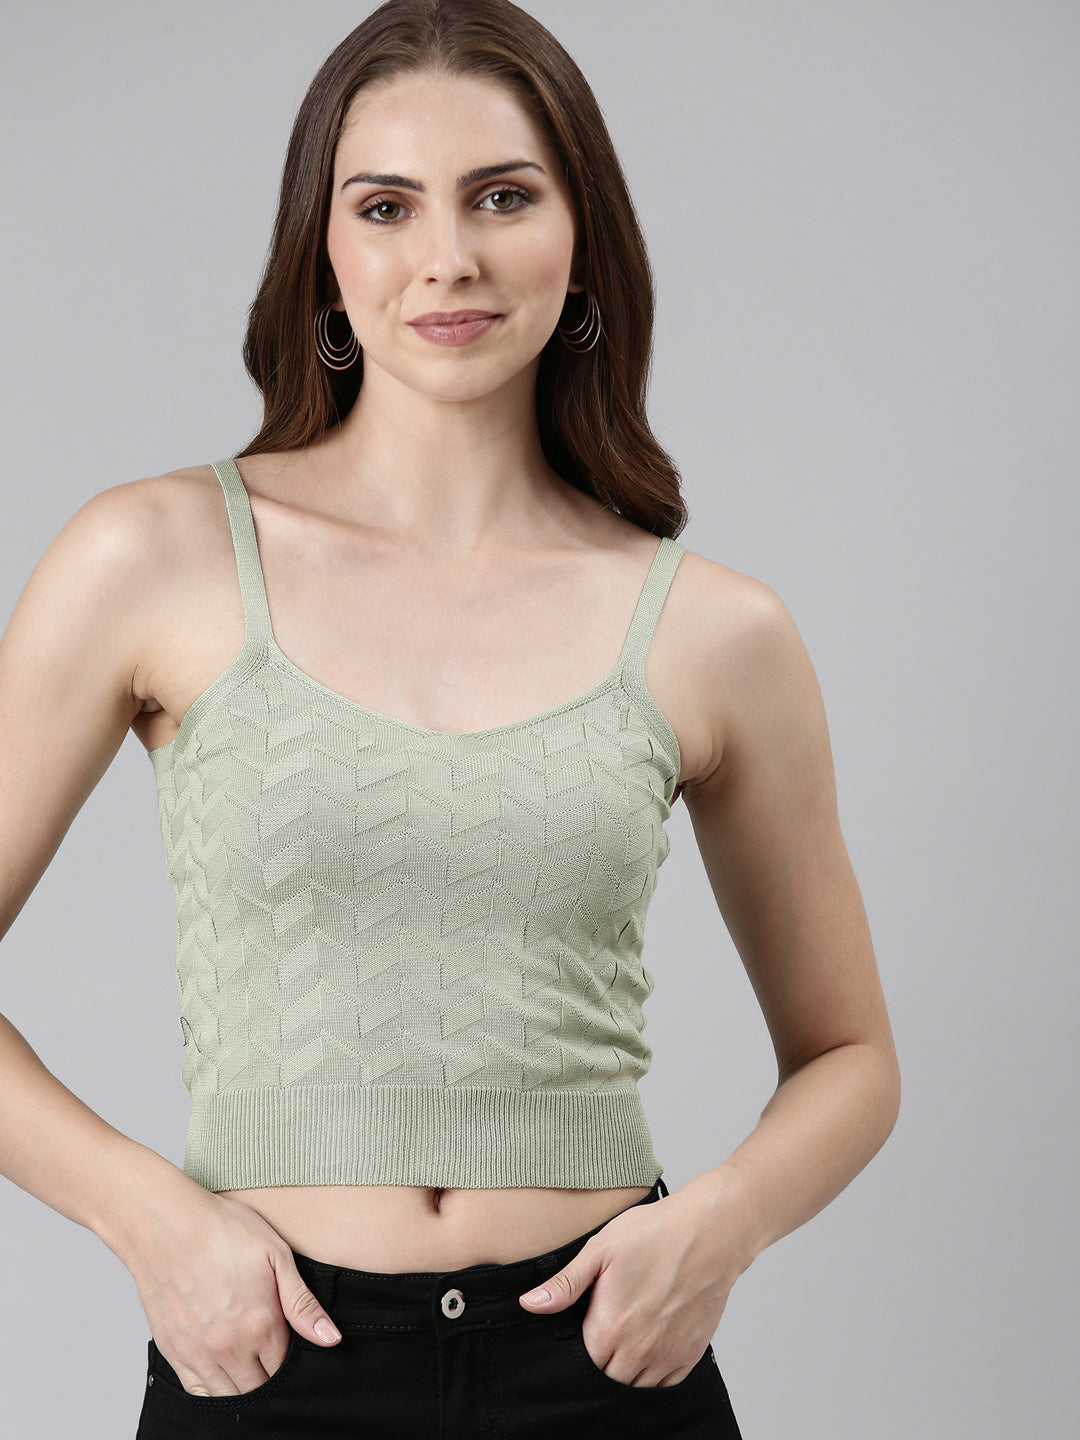 Shoulder Straps Solid Sleeveless Fitted Olive Crop Top